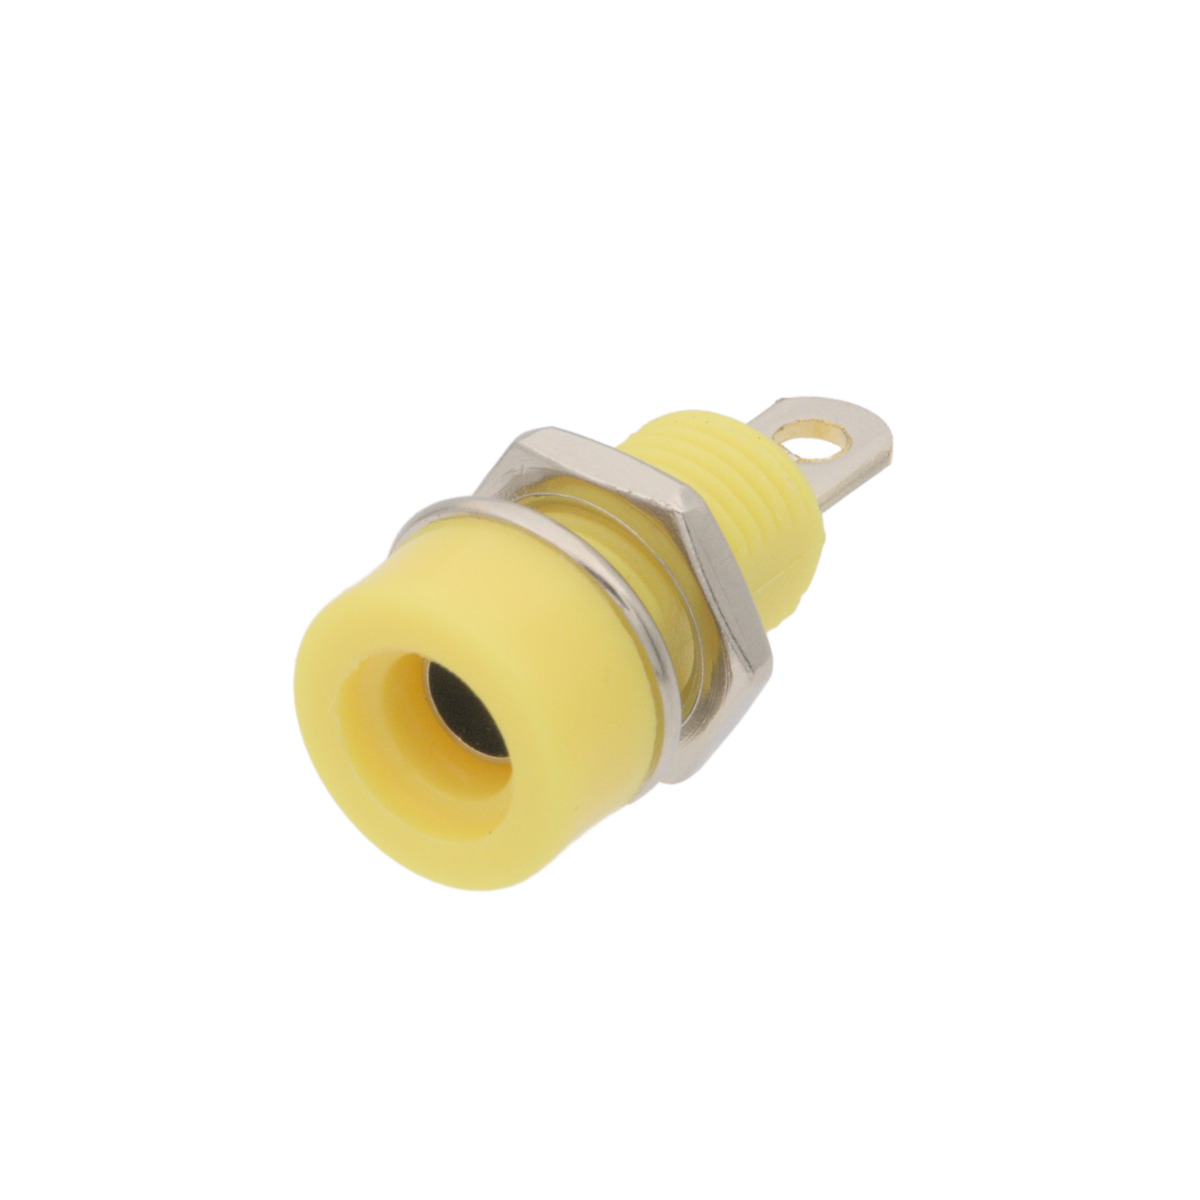 Female Banana Jack Base for Chassis Mounting, Yellow Plastic Body